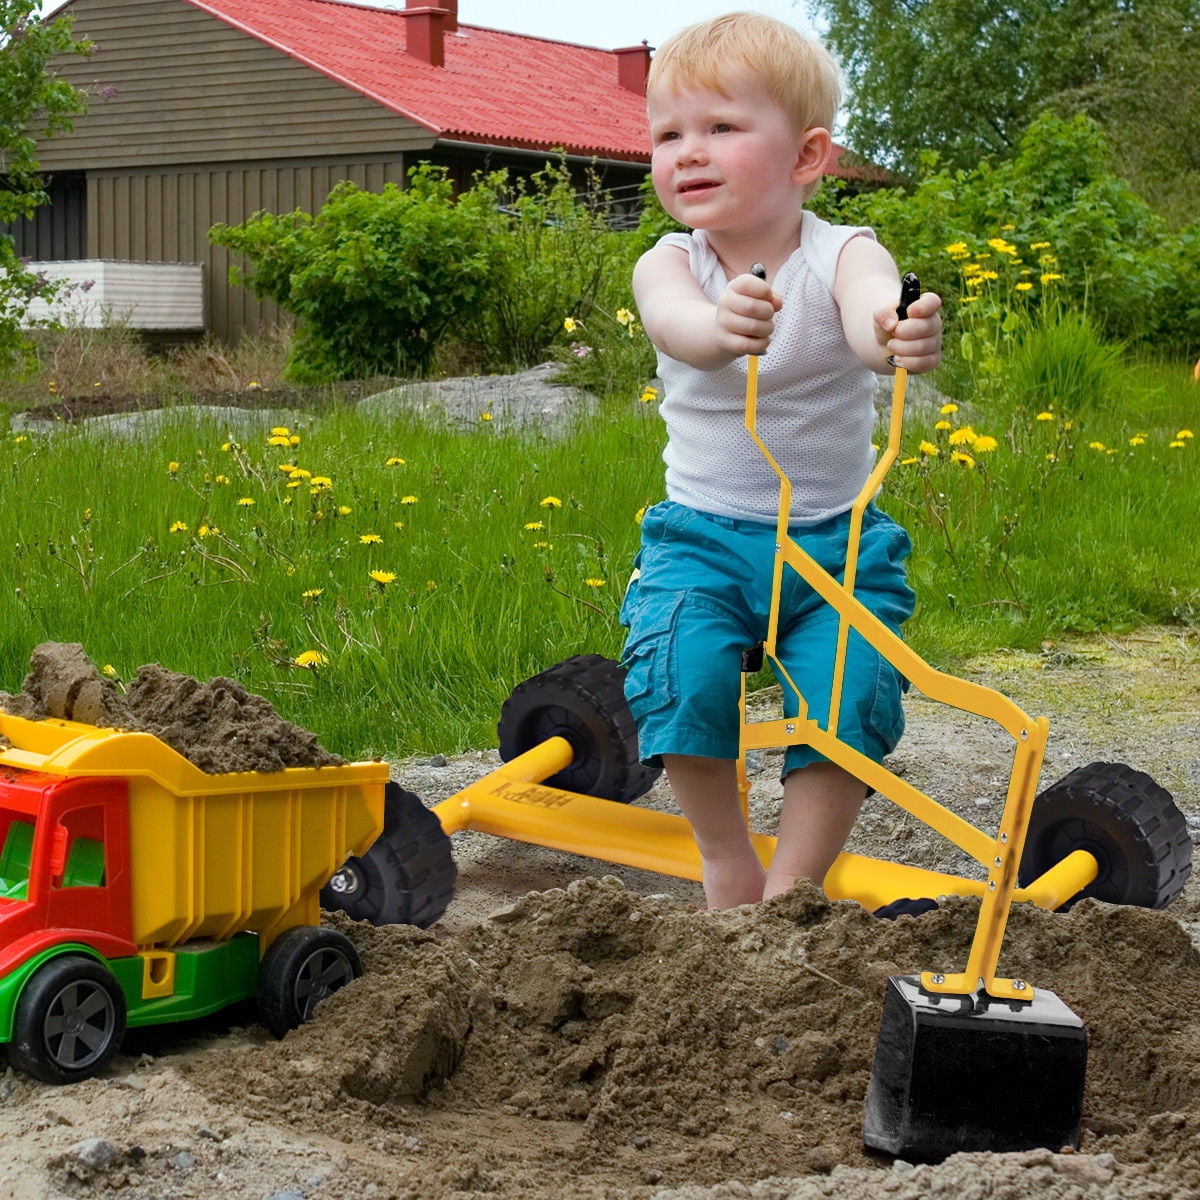 Ride On Excavator Digging Kids Toy Steel Sand Digger Outdoor Snow Yard Play Game 